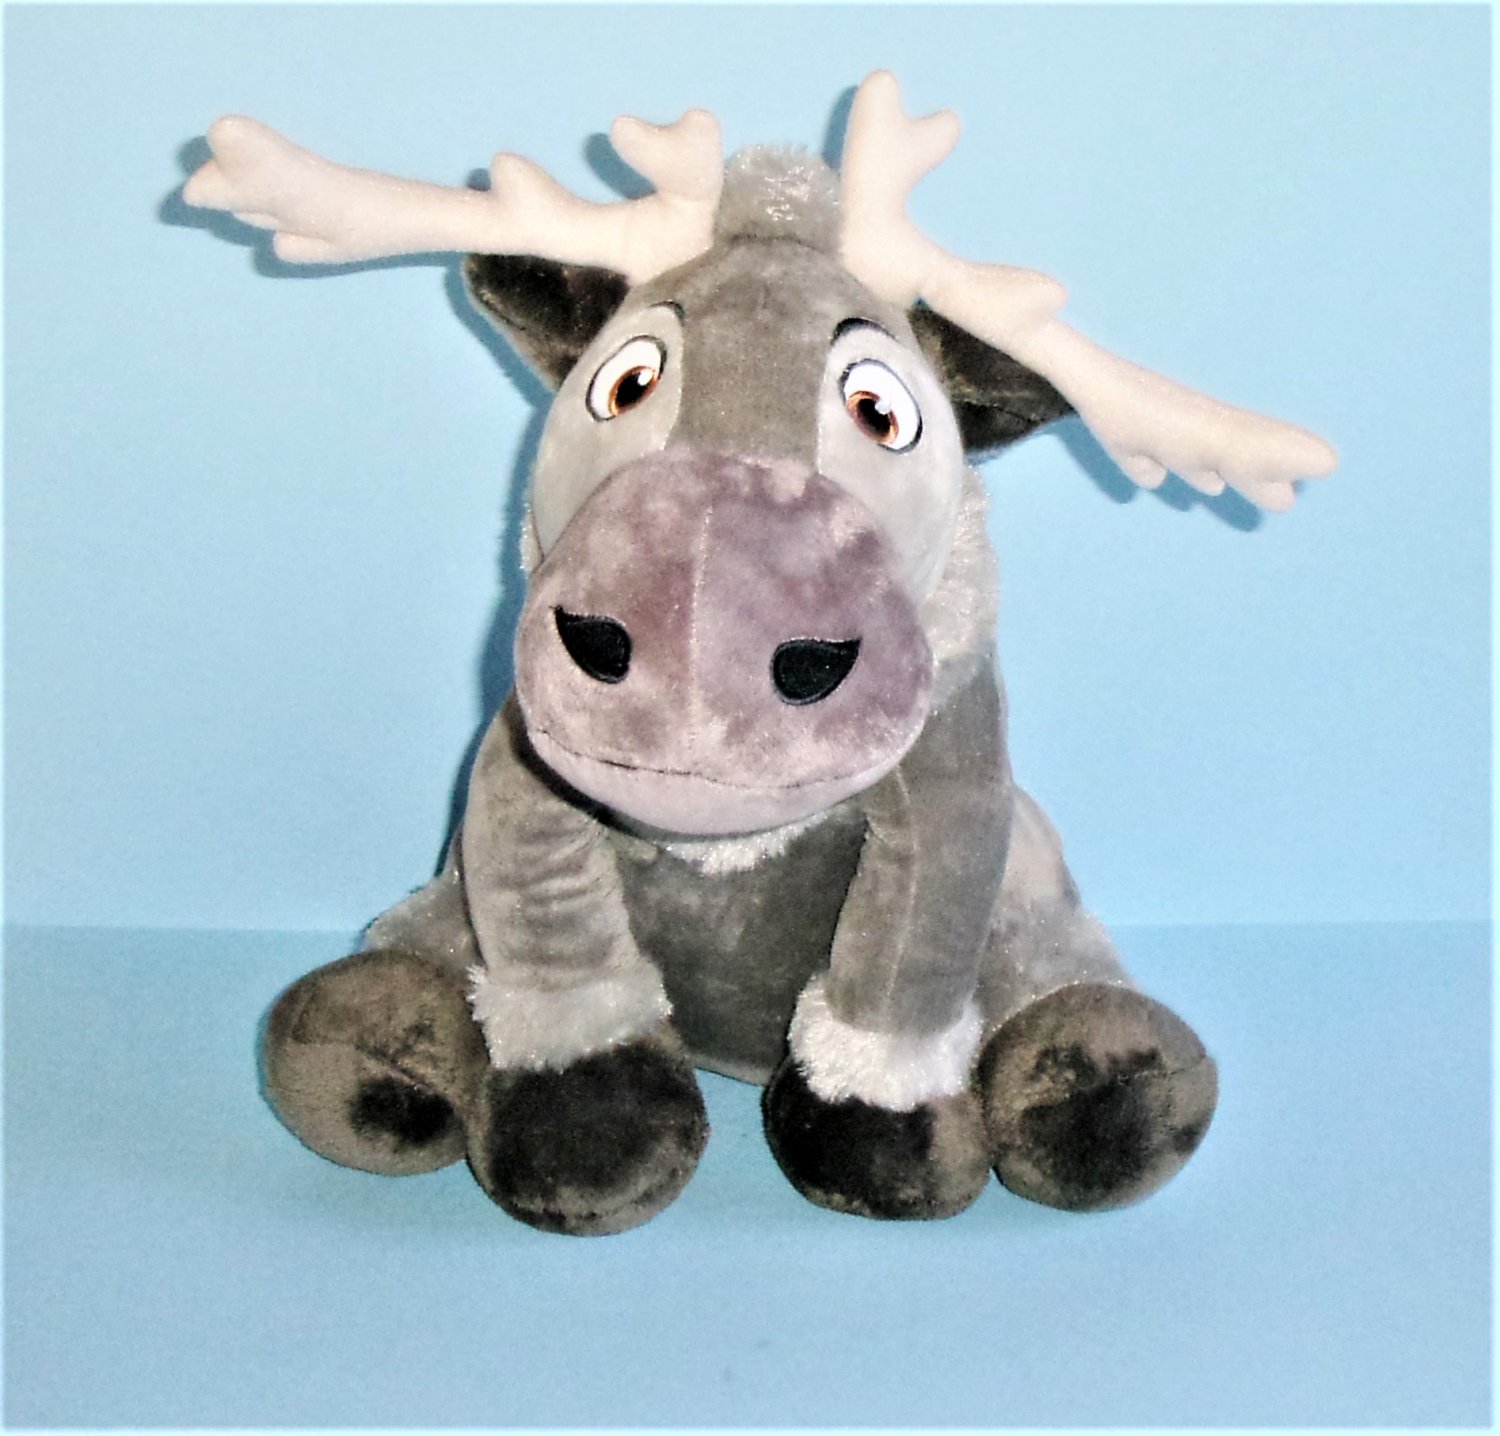 Disney Frozen Sven The Reindeer Plush Cuddle Pillow 14 Inches Tall